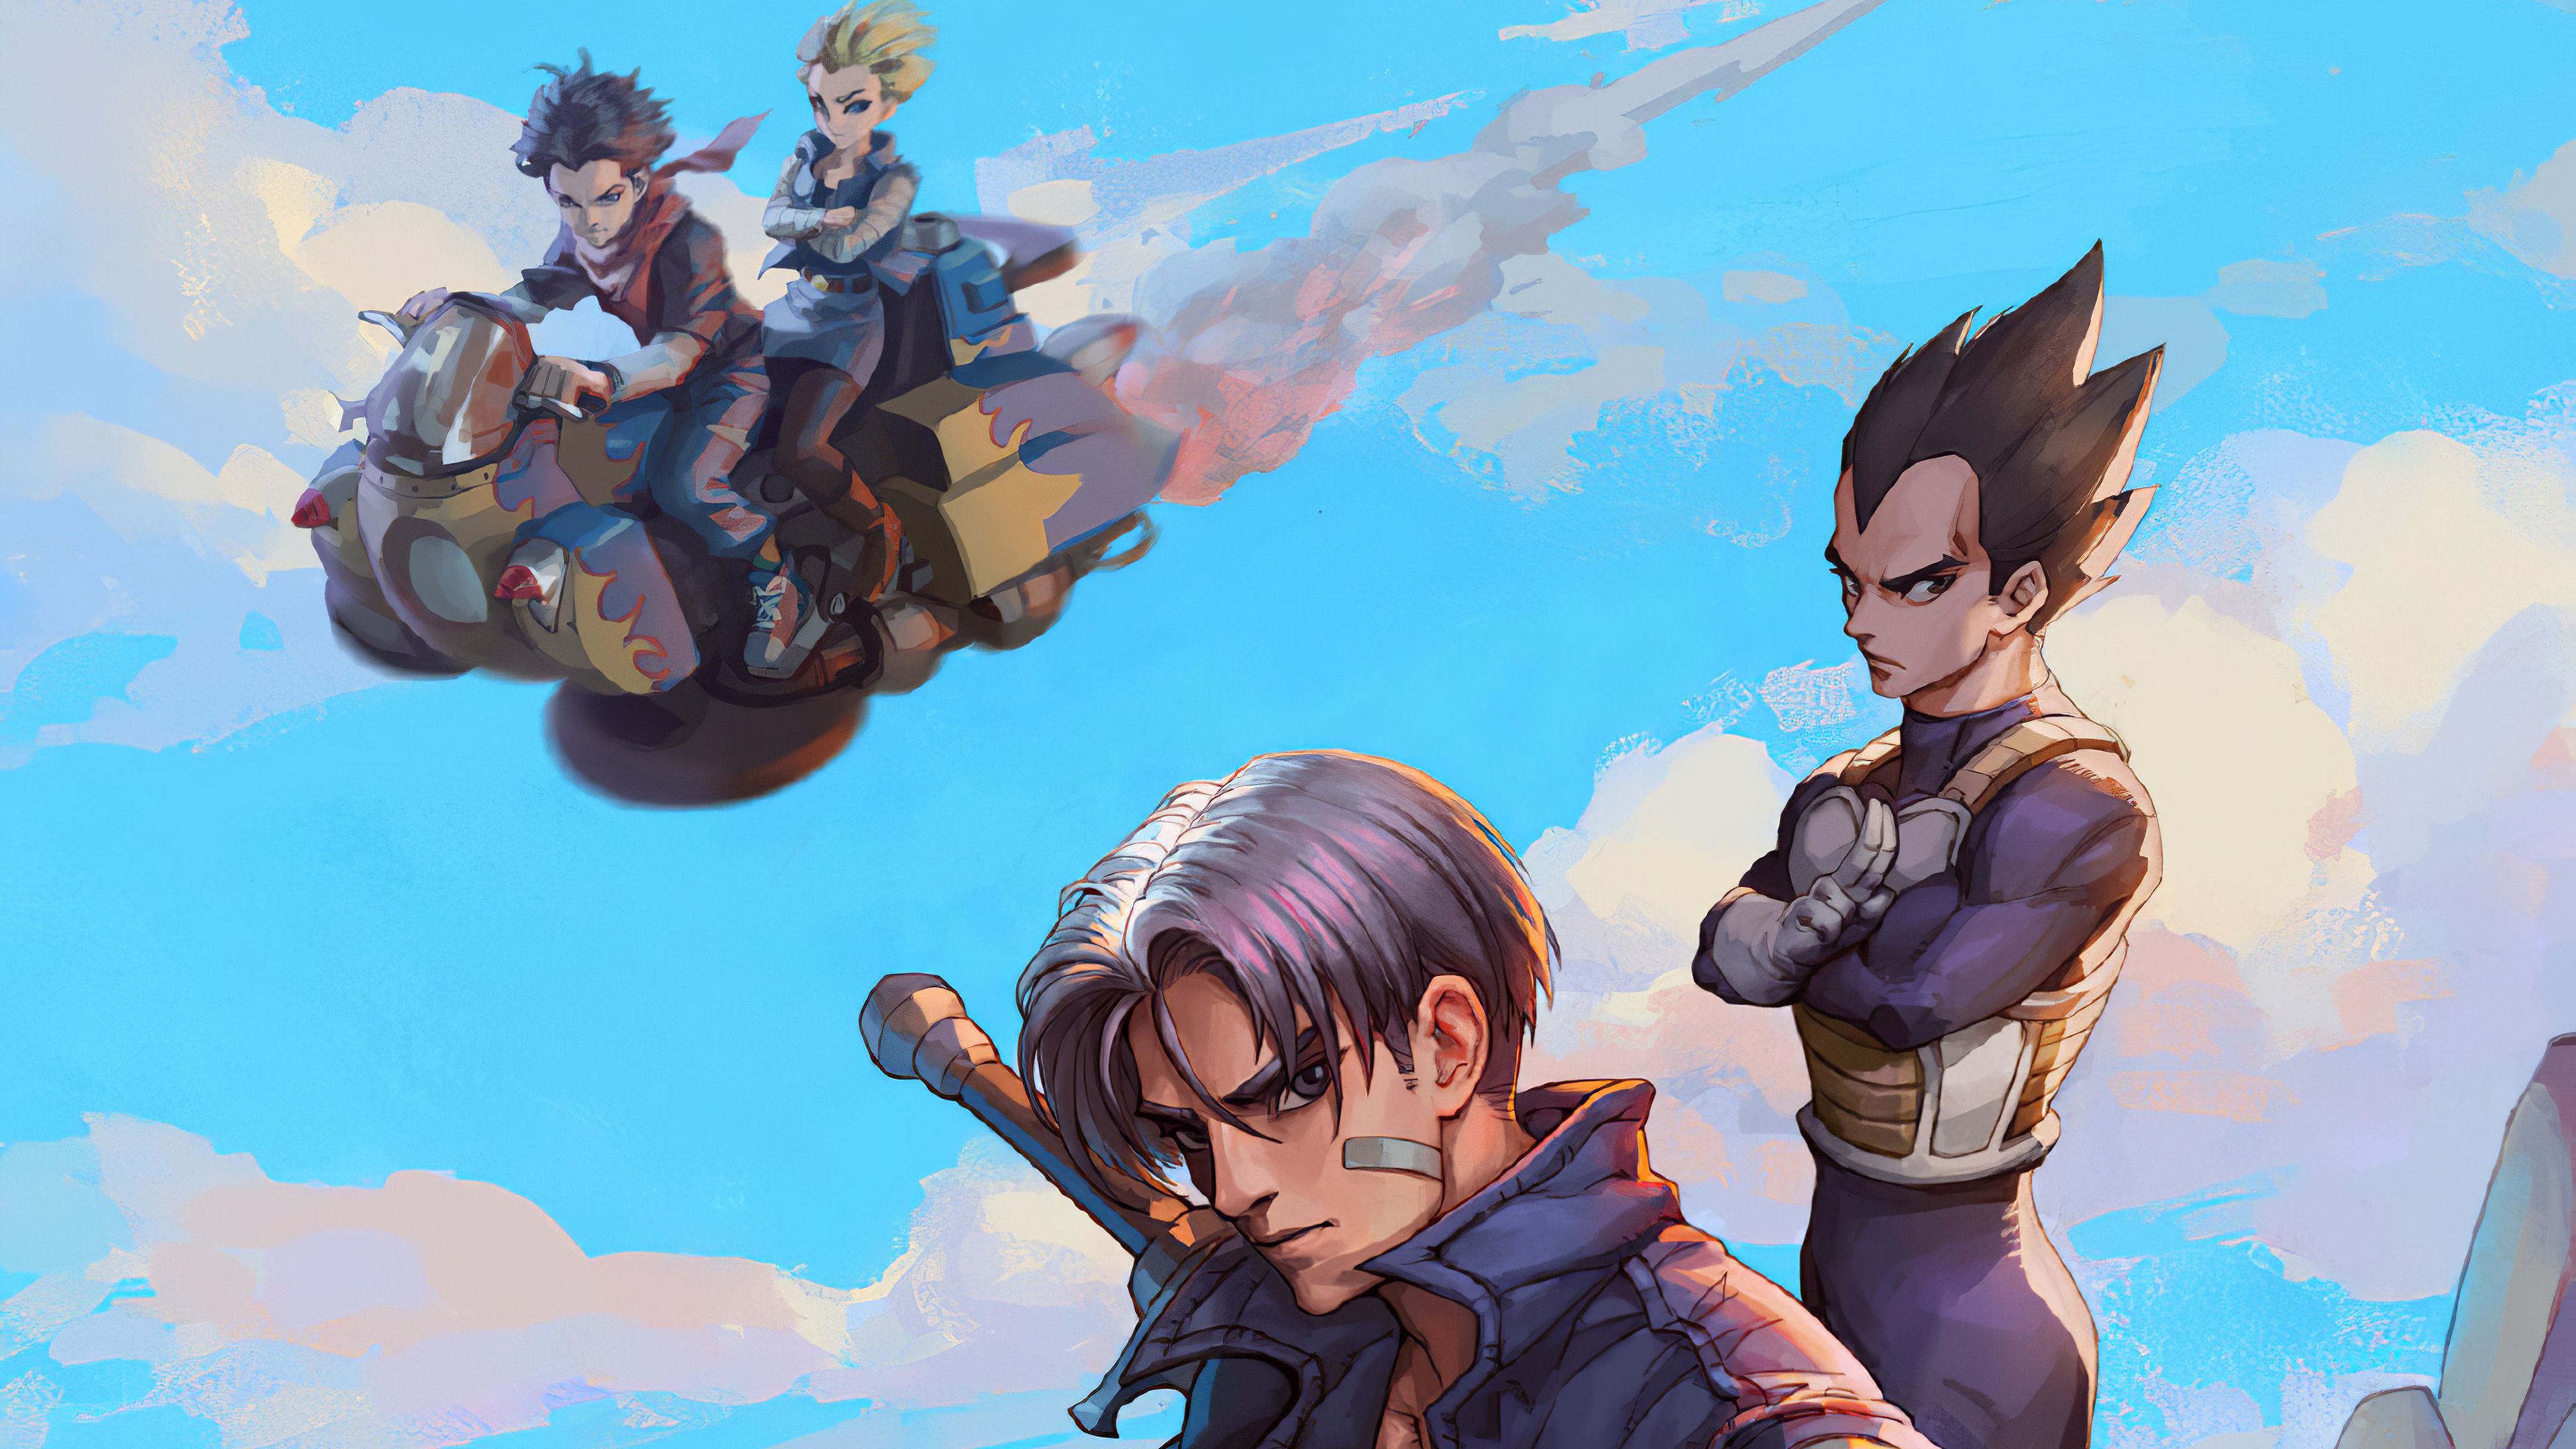 3840x2160 Trunks, HD Anime, 4k Wallpaper, Image, Background, Photo and Pict...